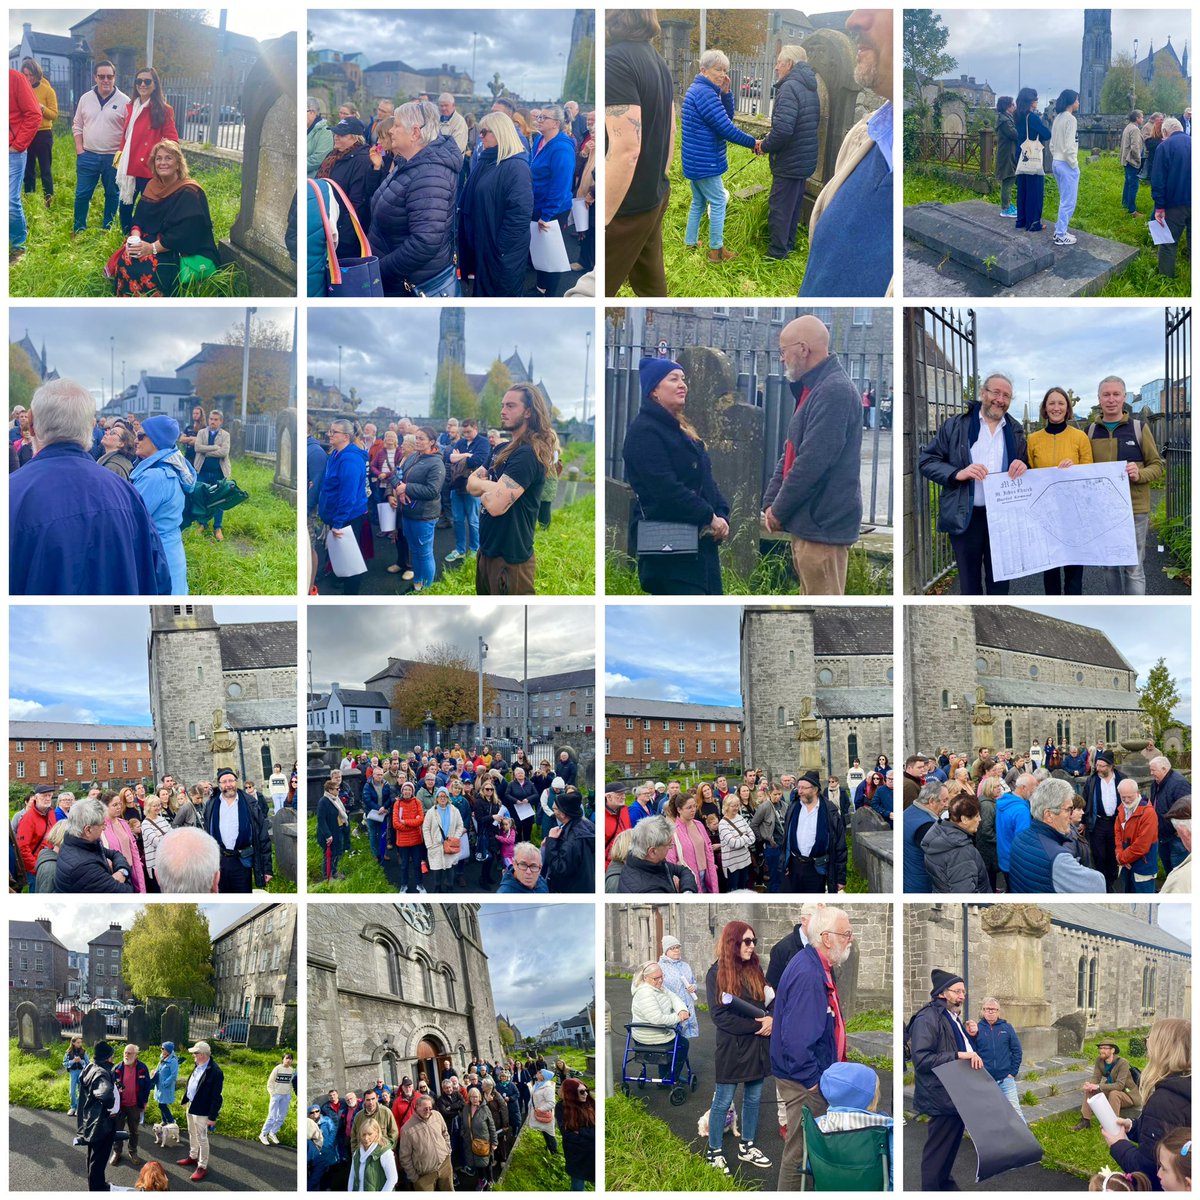 Such a great day. Brilliant start to the bank holiday in #Limerick. Thanks to everyone for attending and contributing. St John’s Churchyard should feature prominently in the tourist offering of the city. Thanks to @DanceLimerick